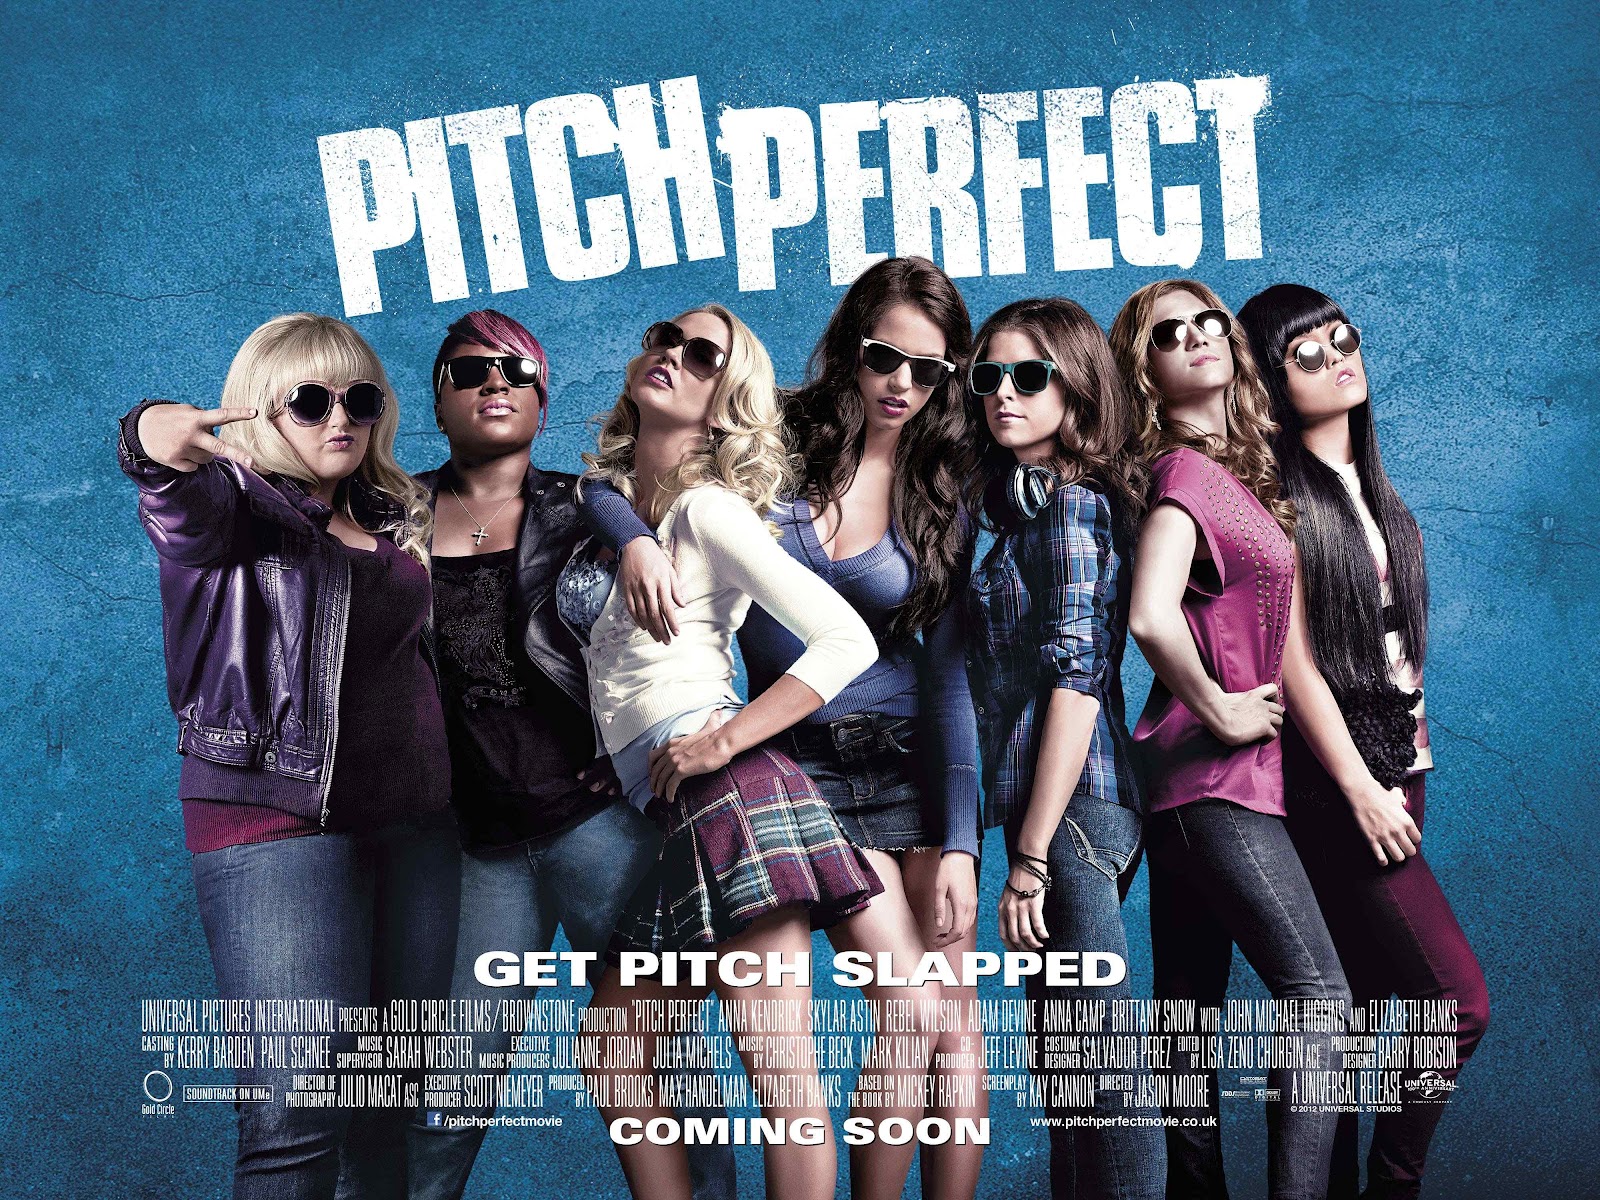 pitch perfect wallpaper,eyewear,album cover,cool,font,poster